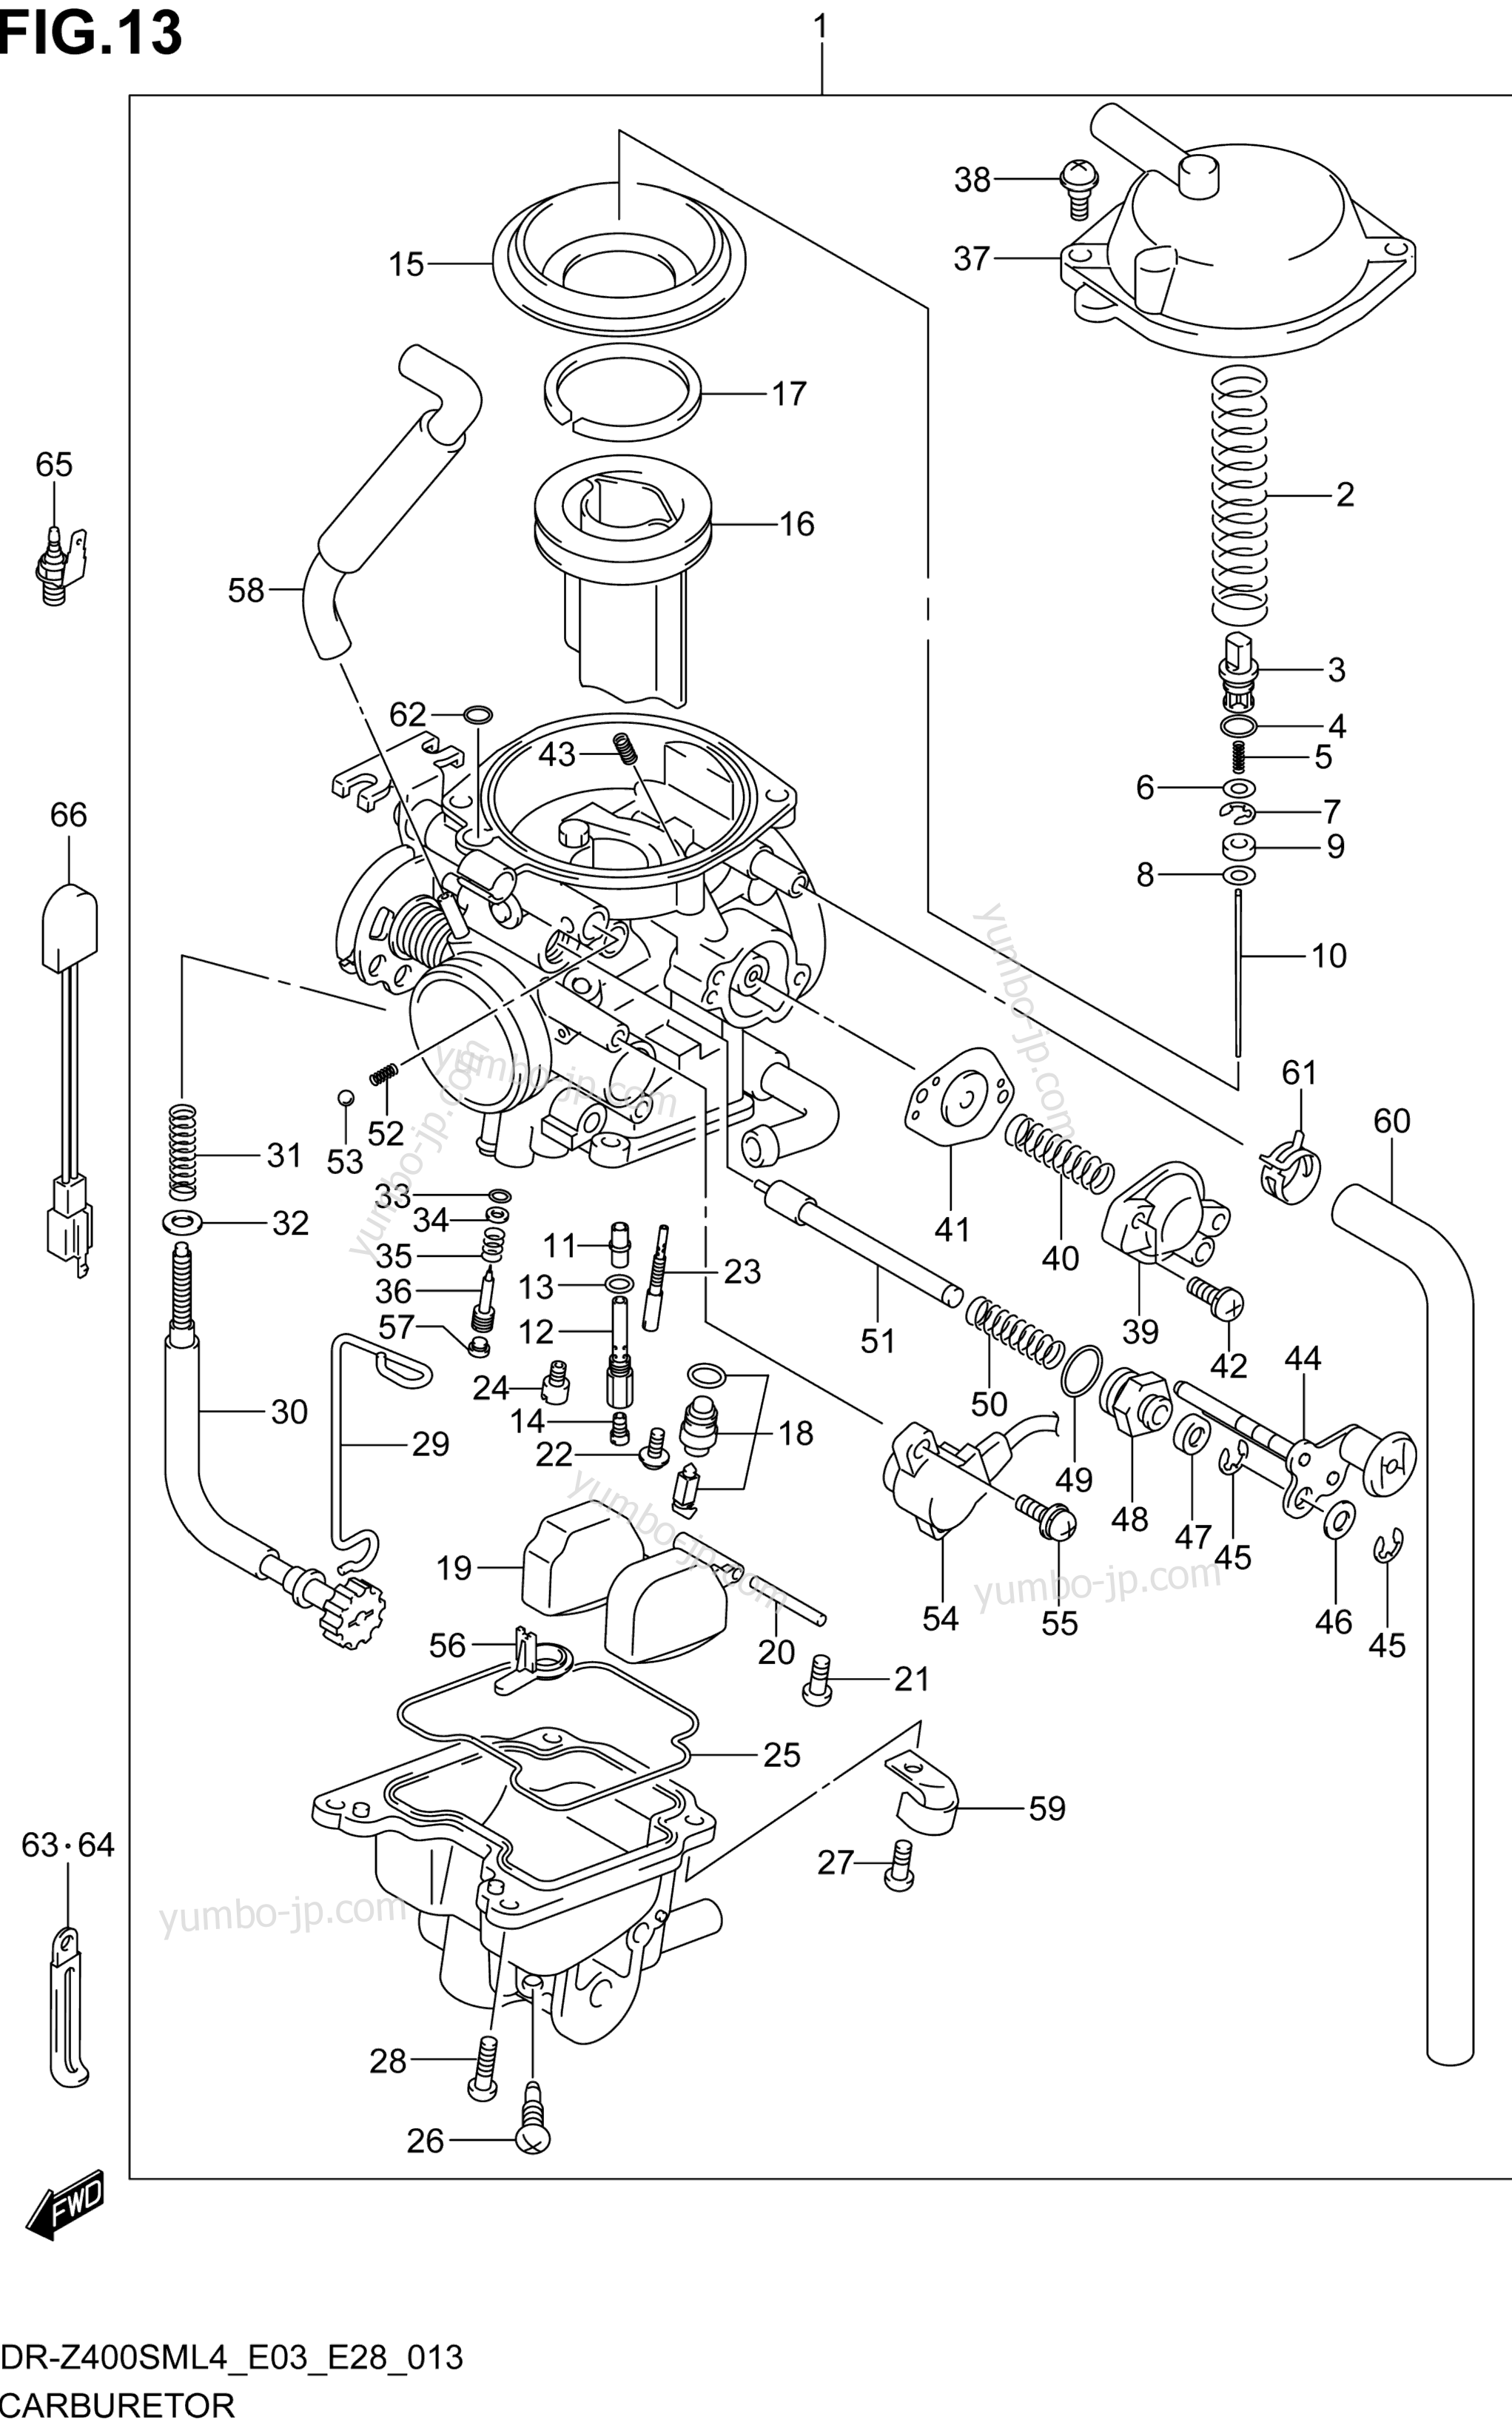 CARBURETOR (DR-Z400SML4 E28) for motorcycles SUZUKI DR-Z400SM 2014 year